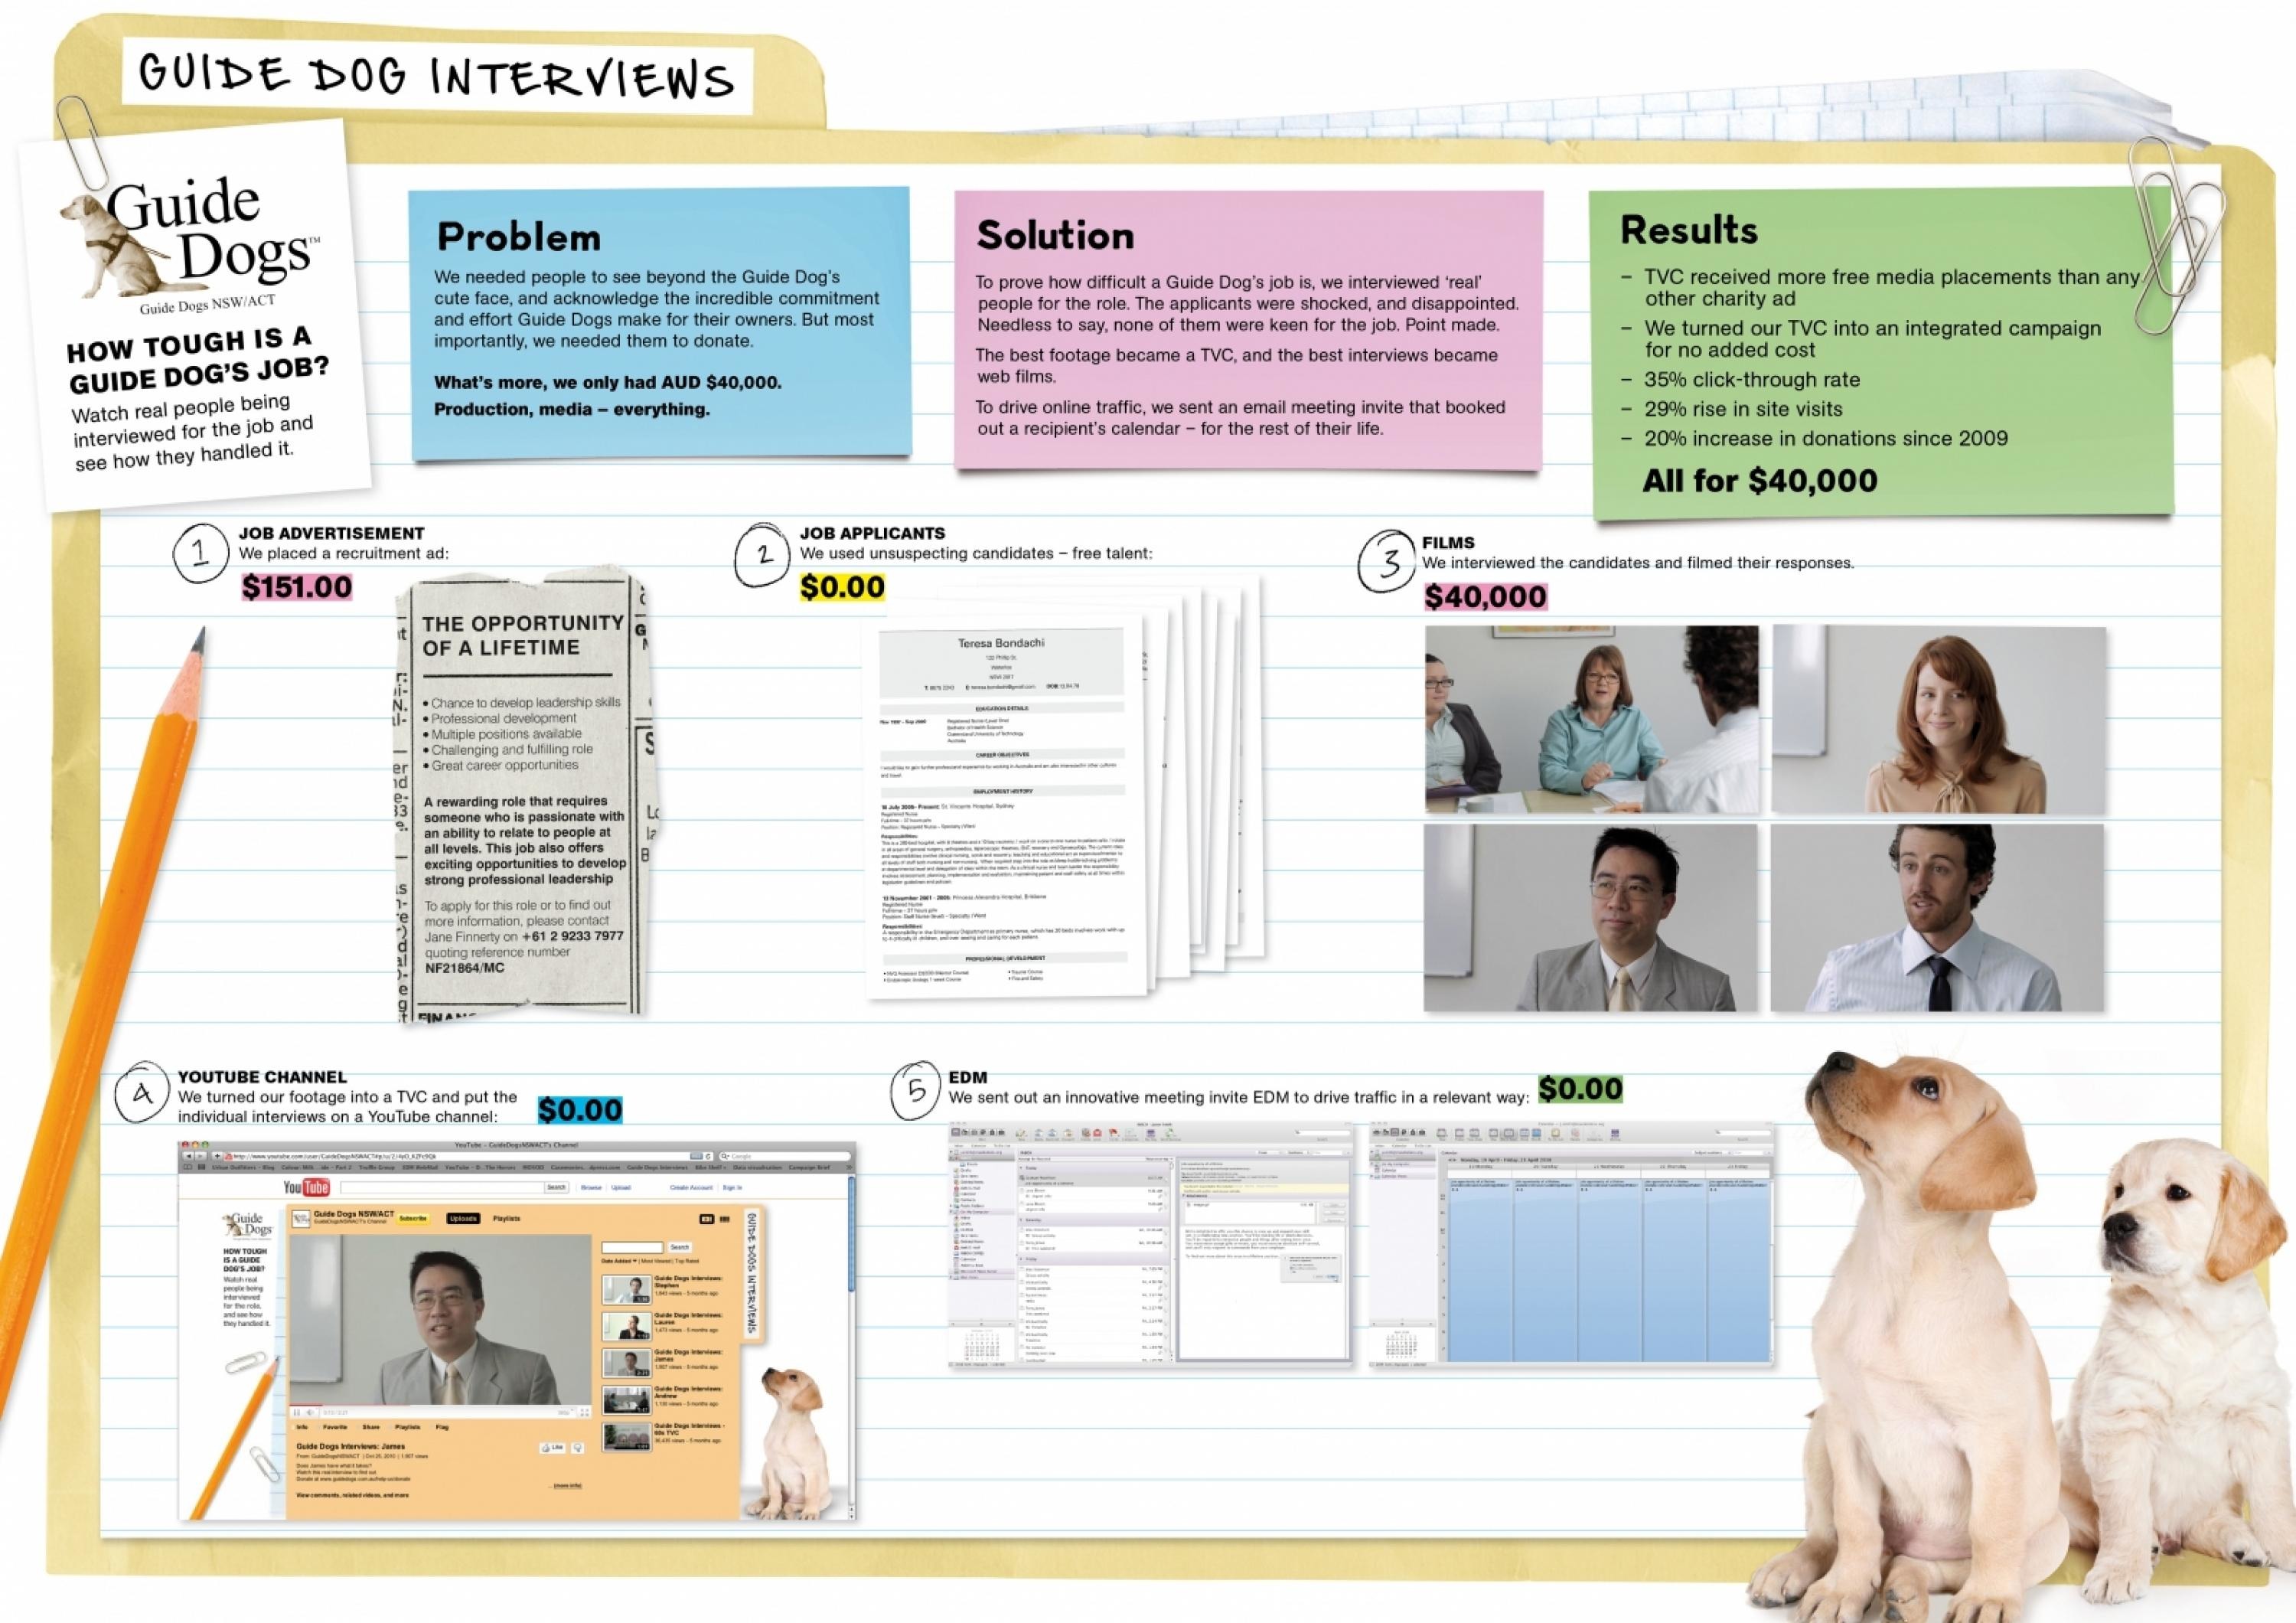 THE GUIDE DOG INTERVIEWS